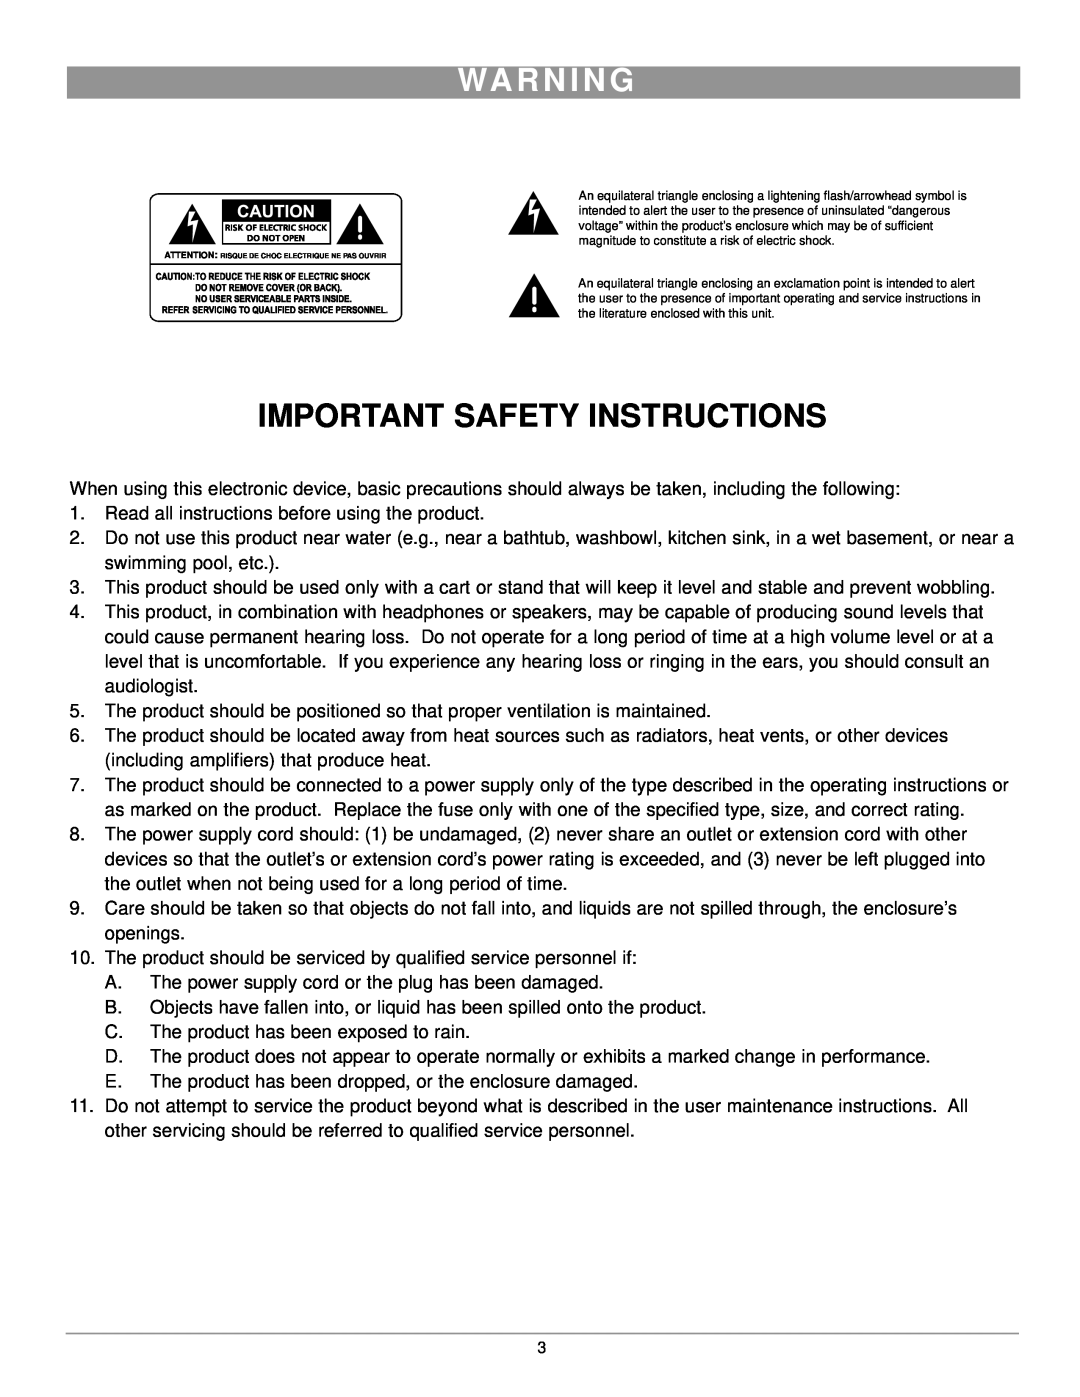 Nady Systems MXE-1212 owner manual Wa R N I N G, Important Safety Instructions 